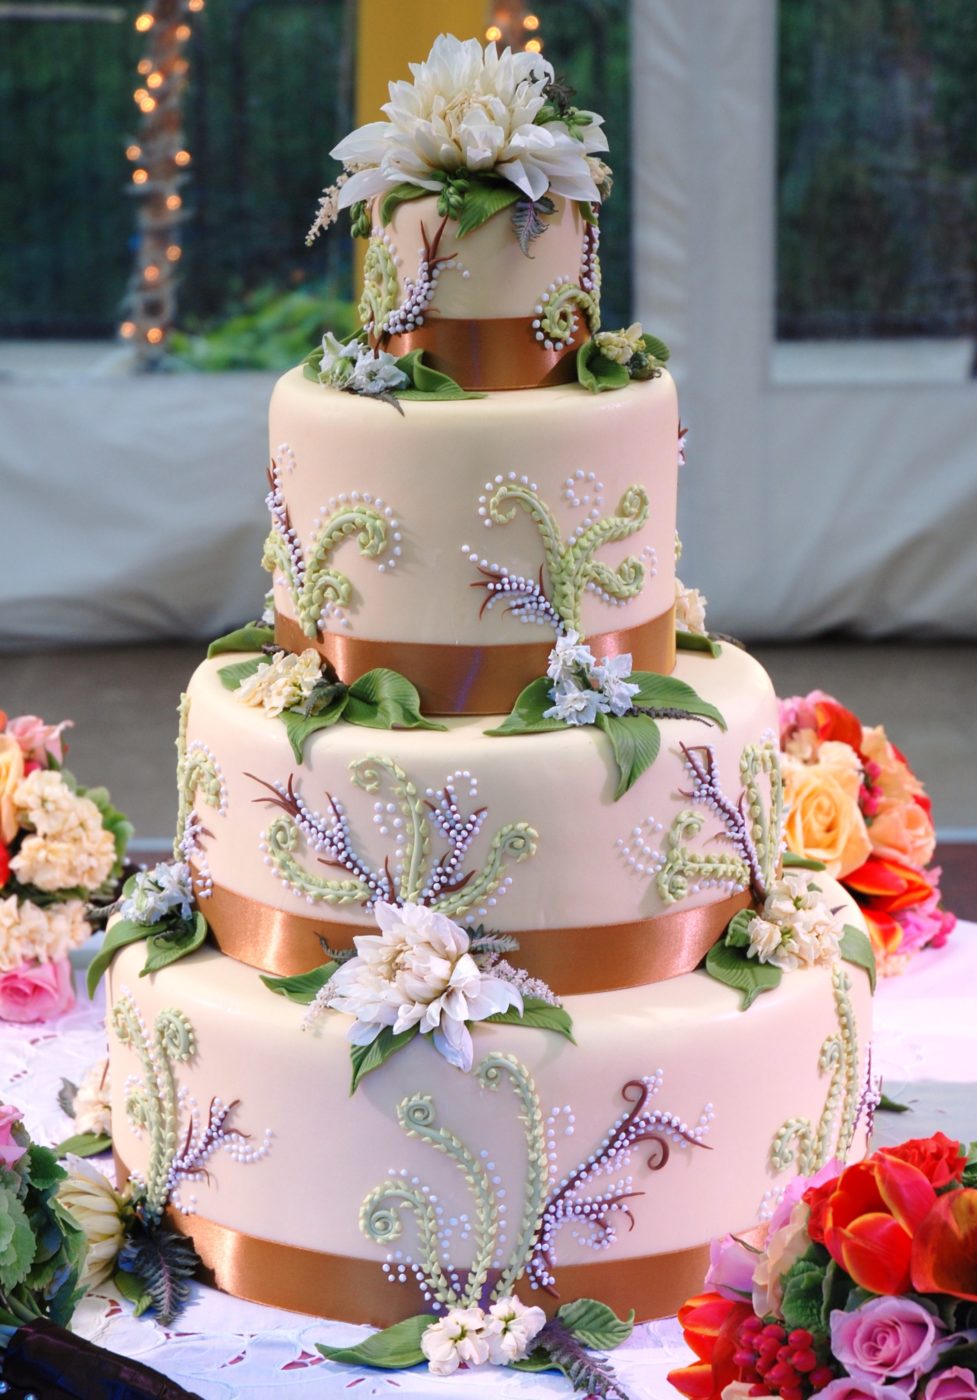 Floating Robes: Just plain cool wedding cakes, but I dont 